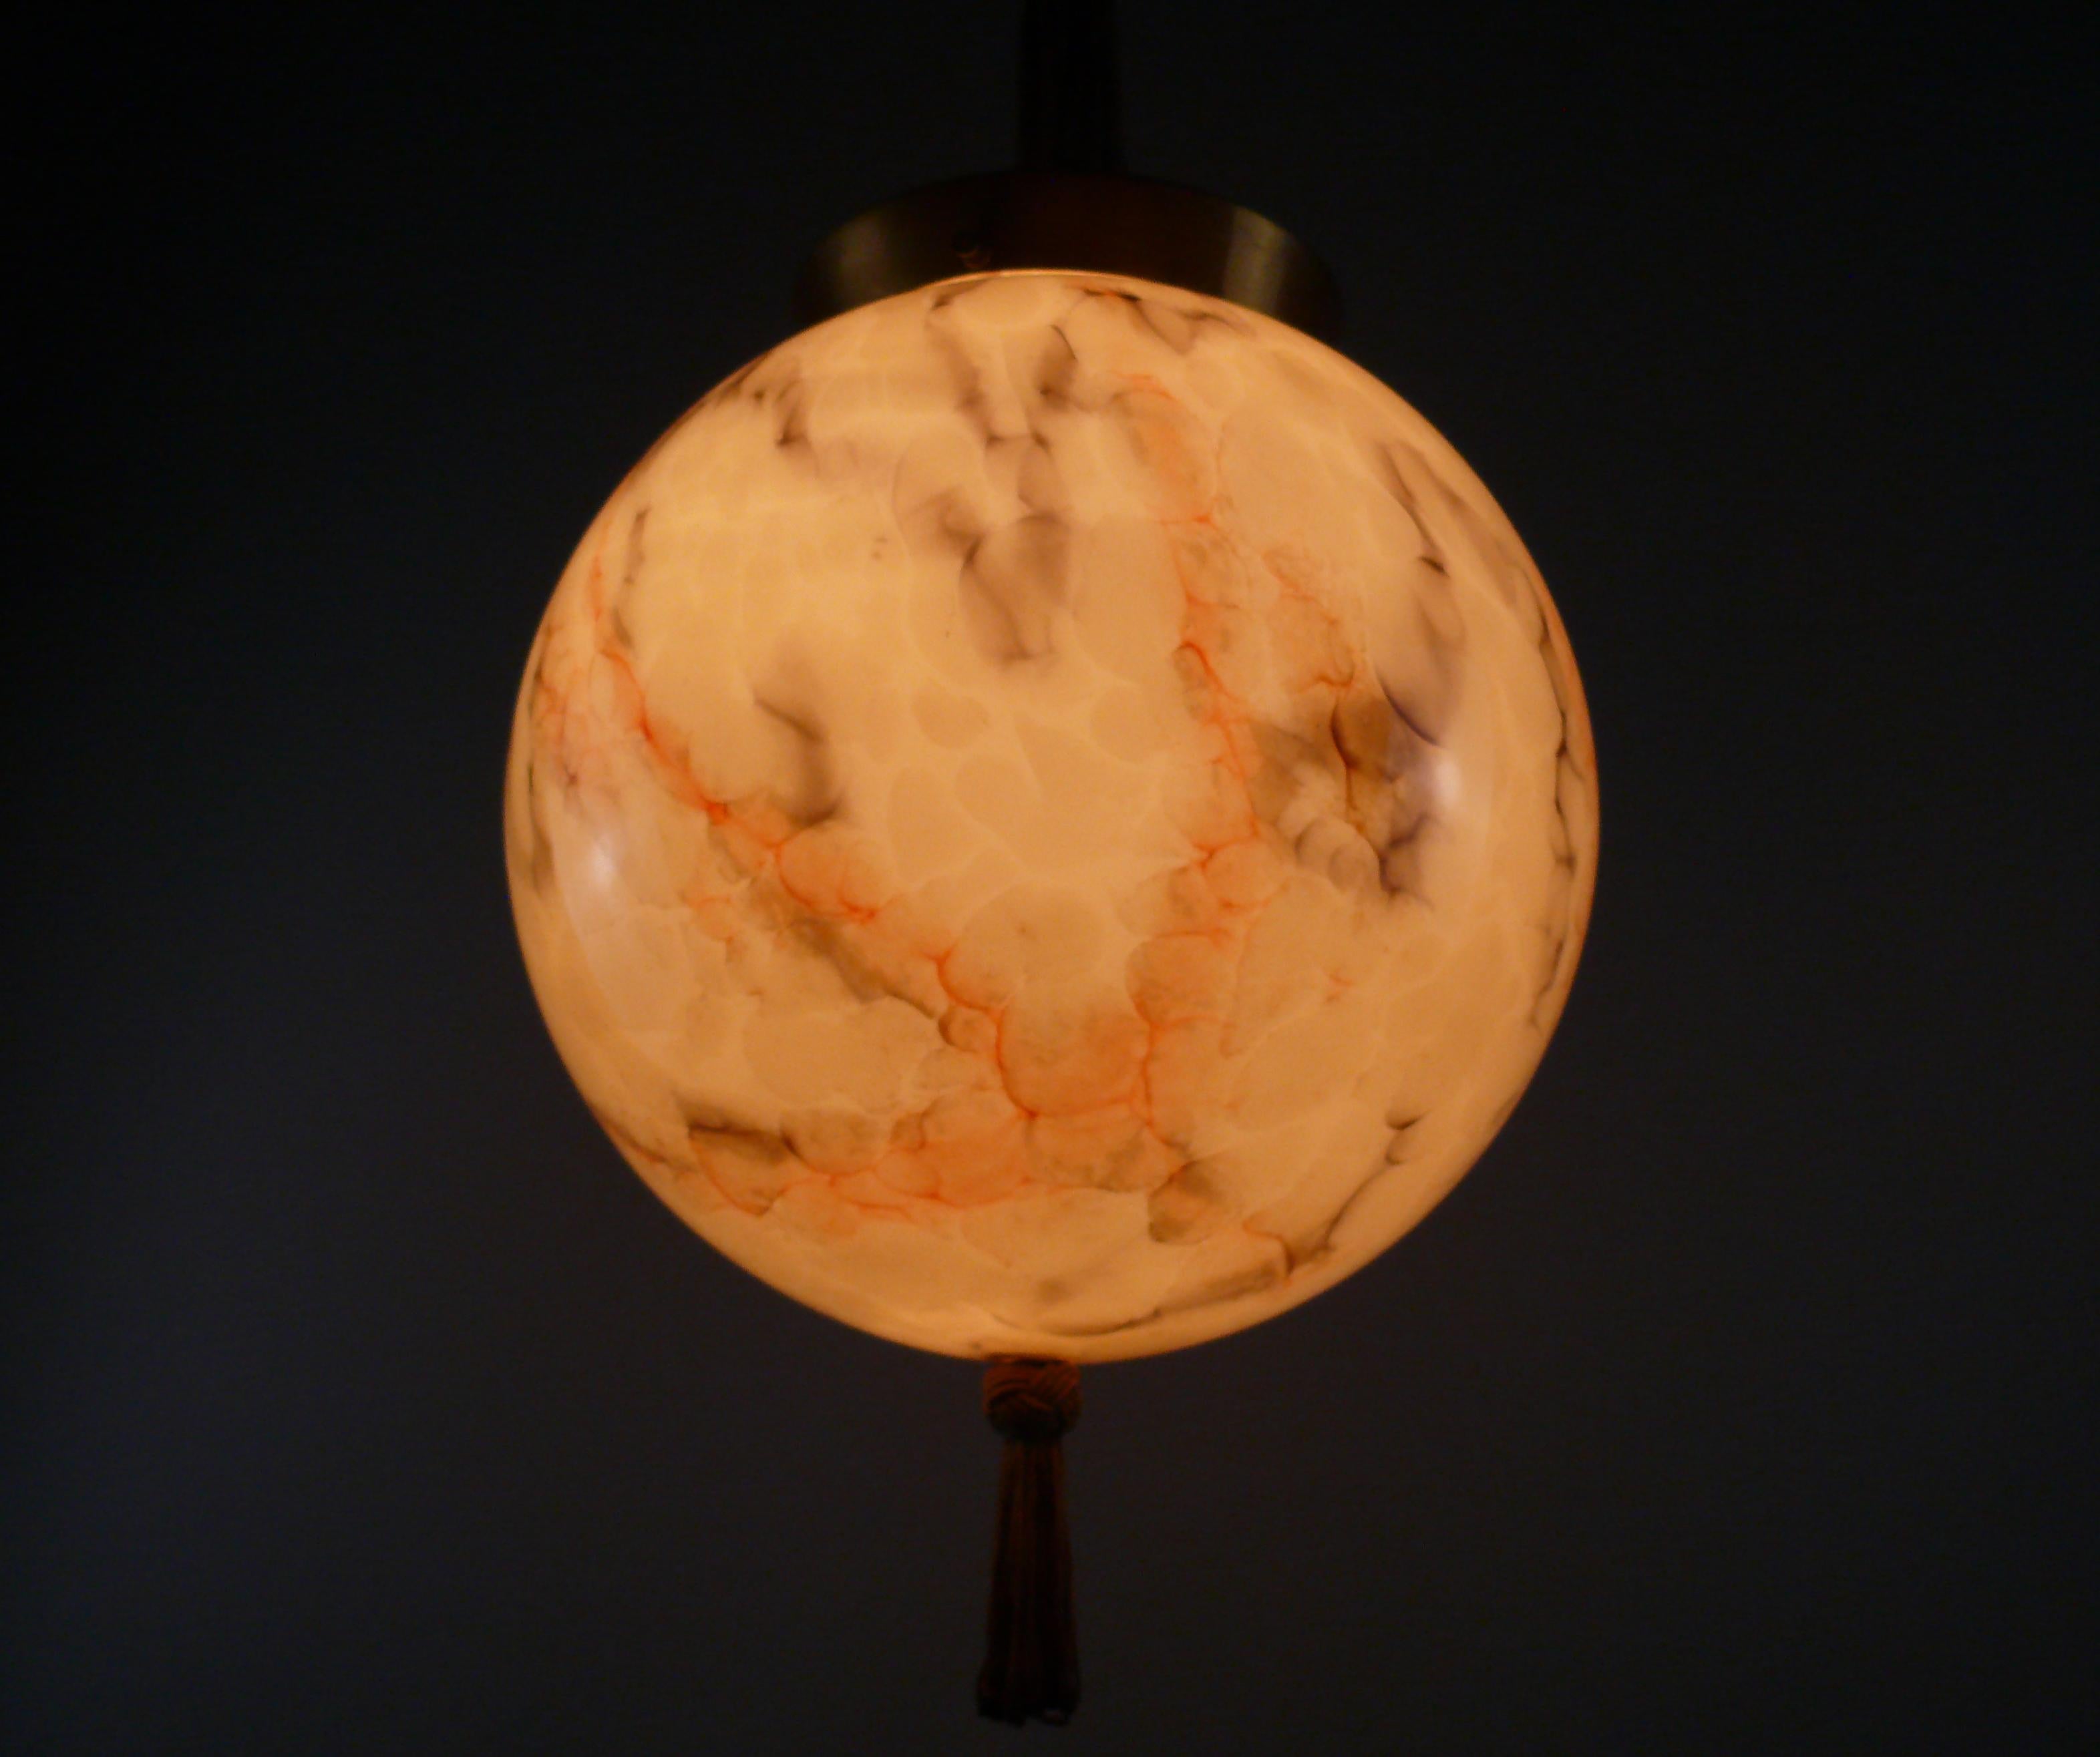 German Art Déco Pendant Light With Marbled Glass, 1930s